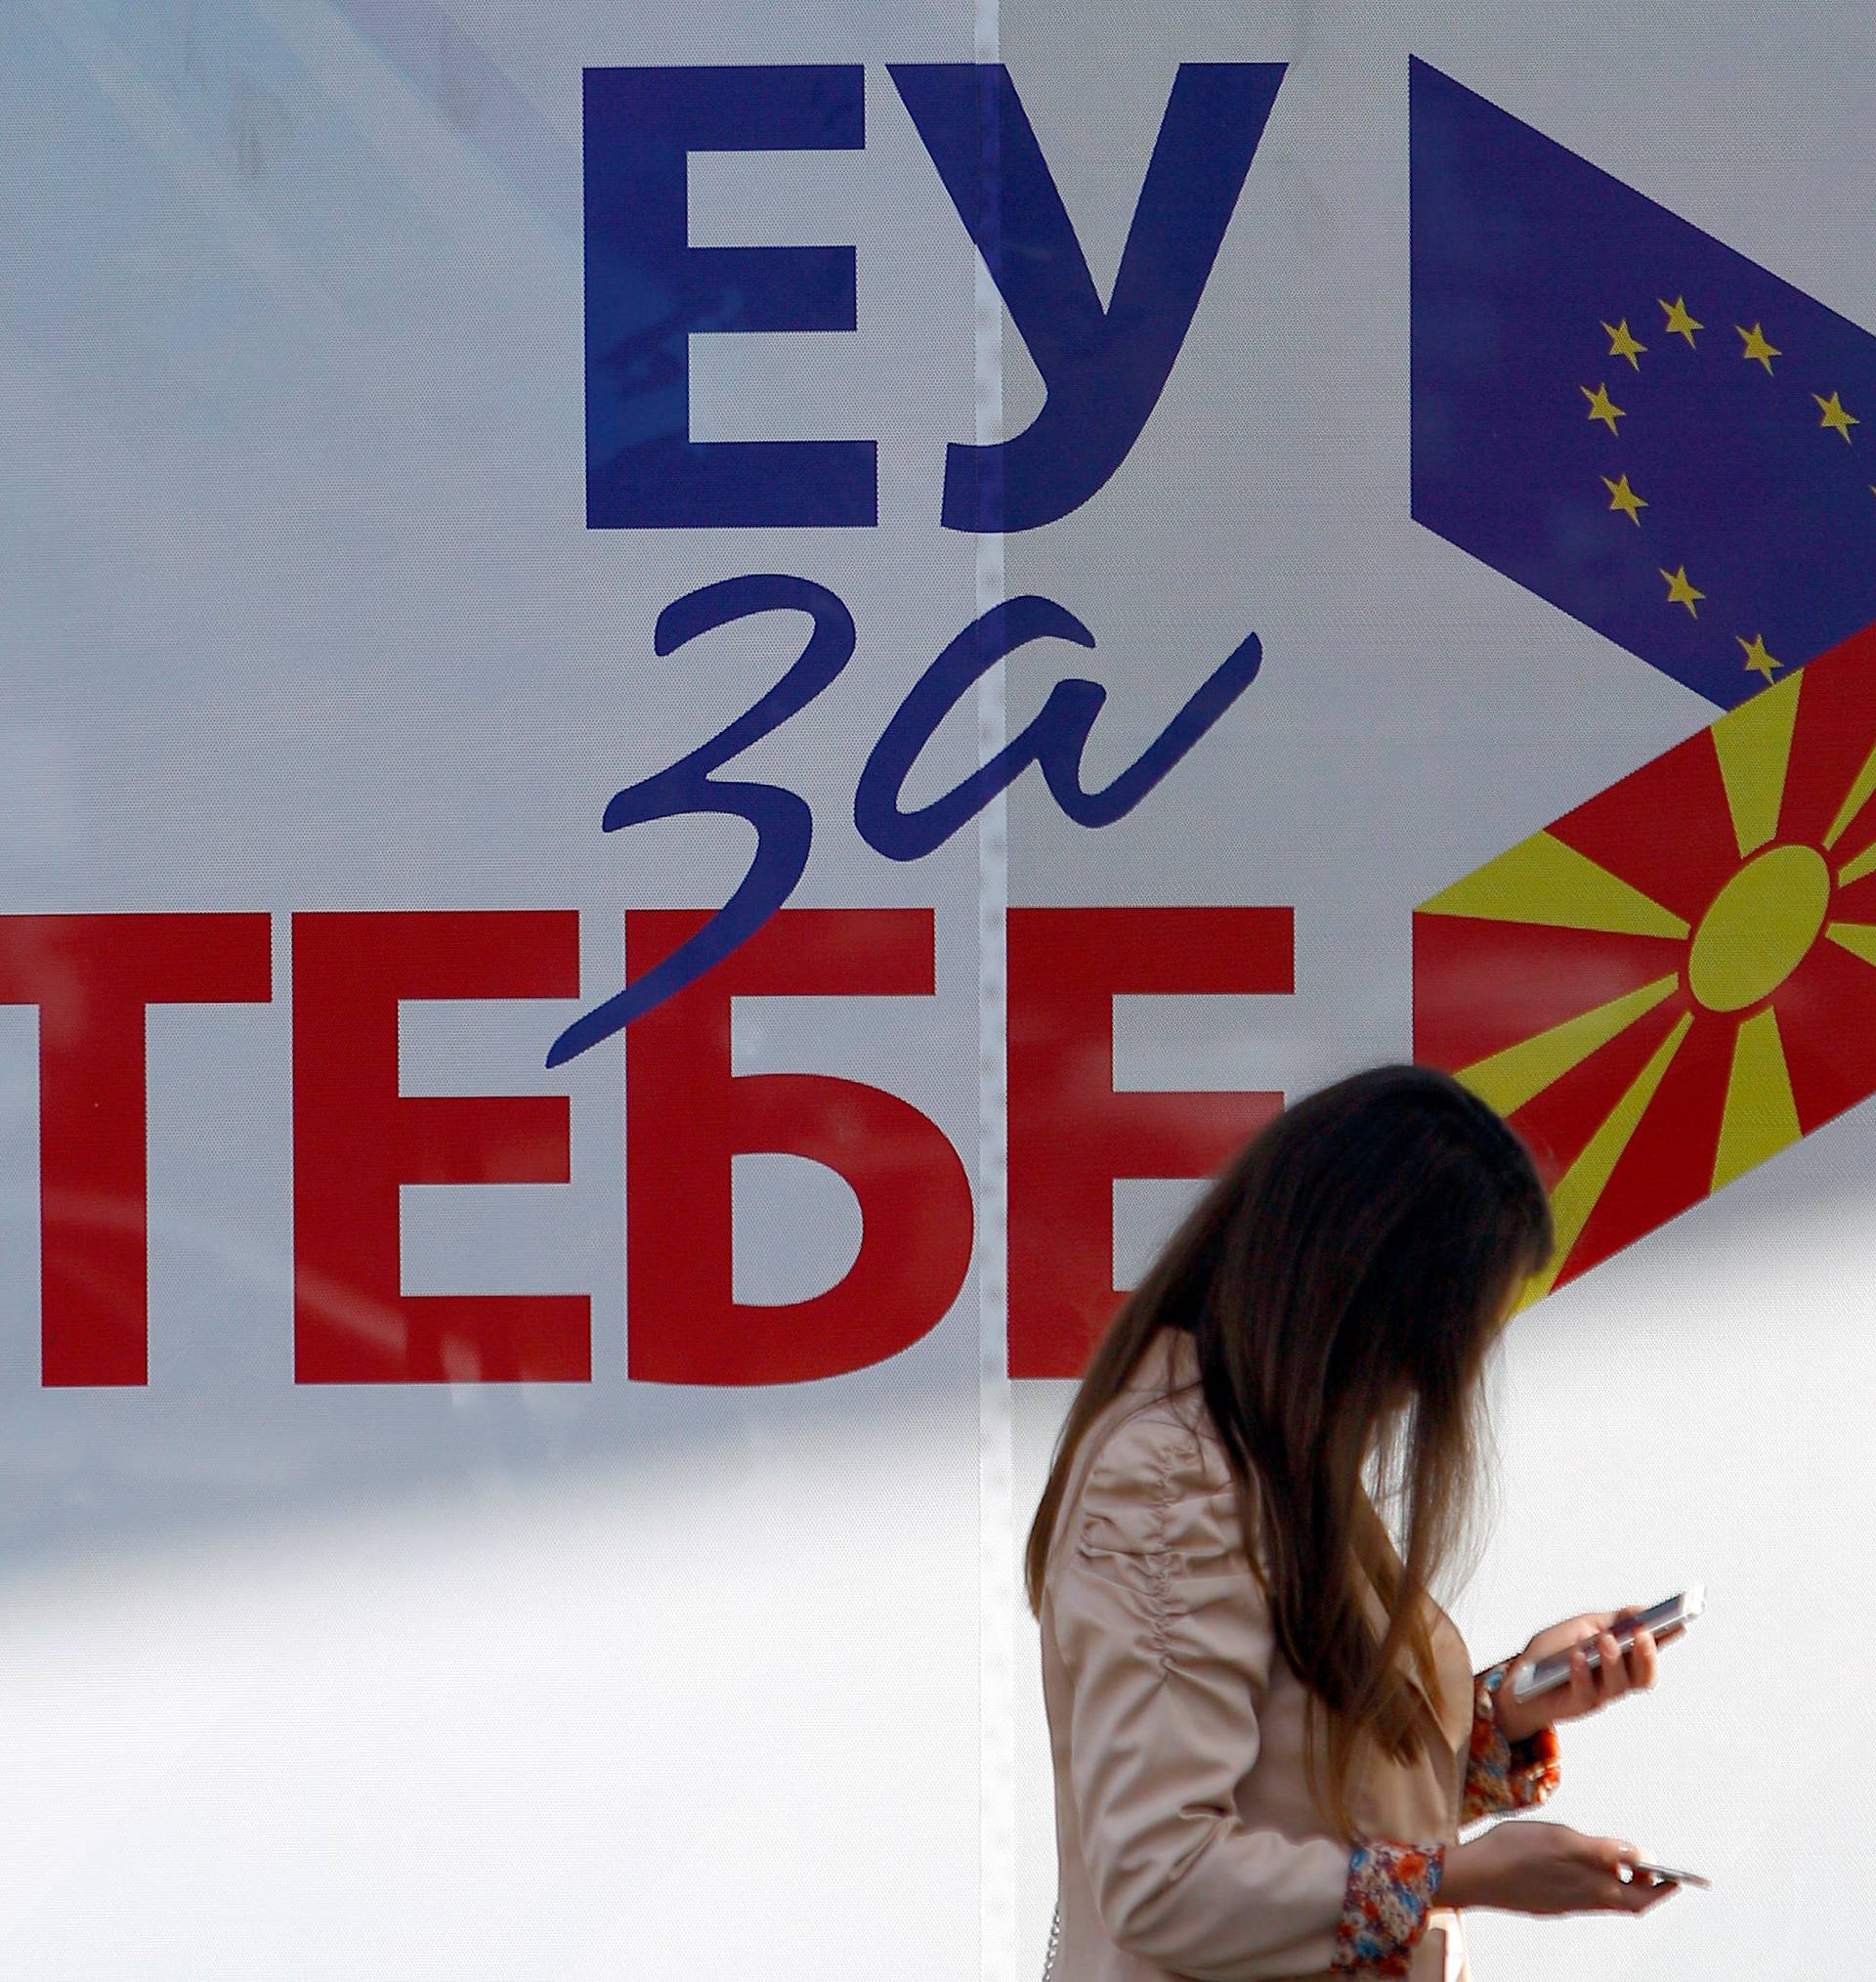 A woman passes next to posters reading "EU for you" for the referendum in Macedonia on changing the country's name in Skopje